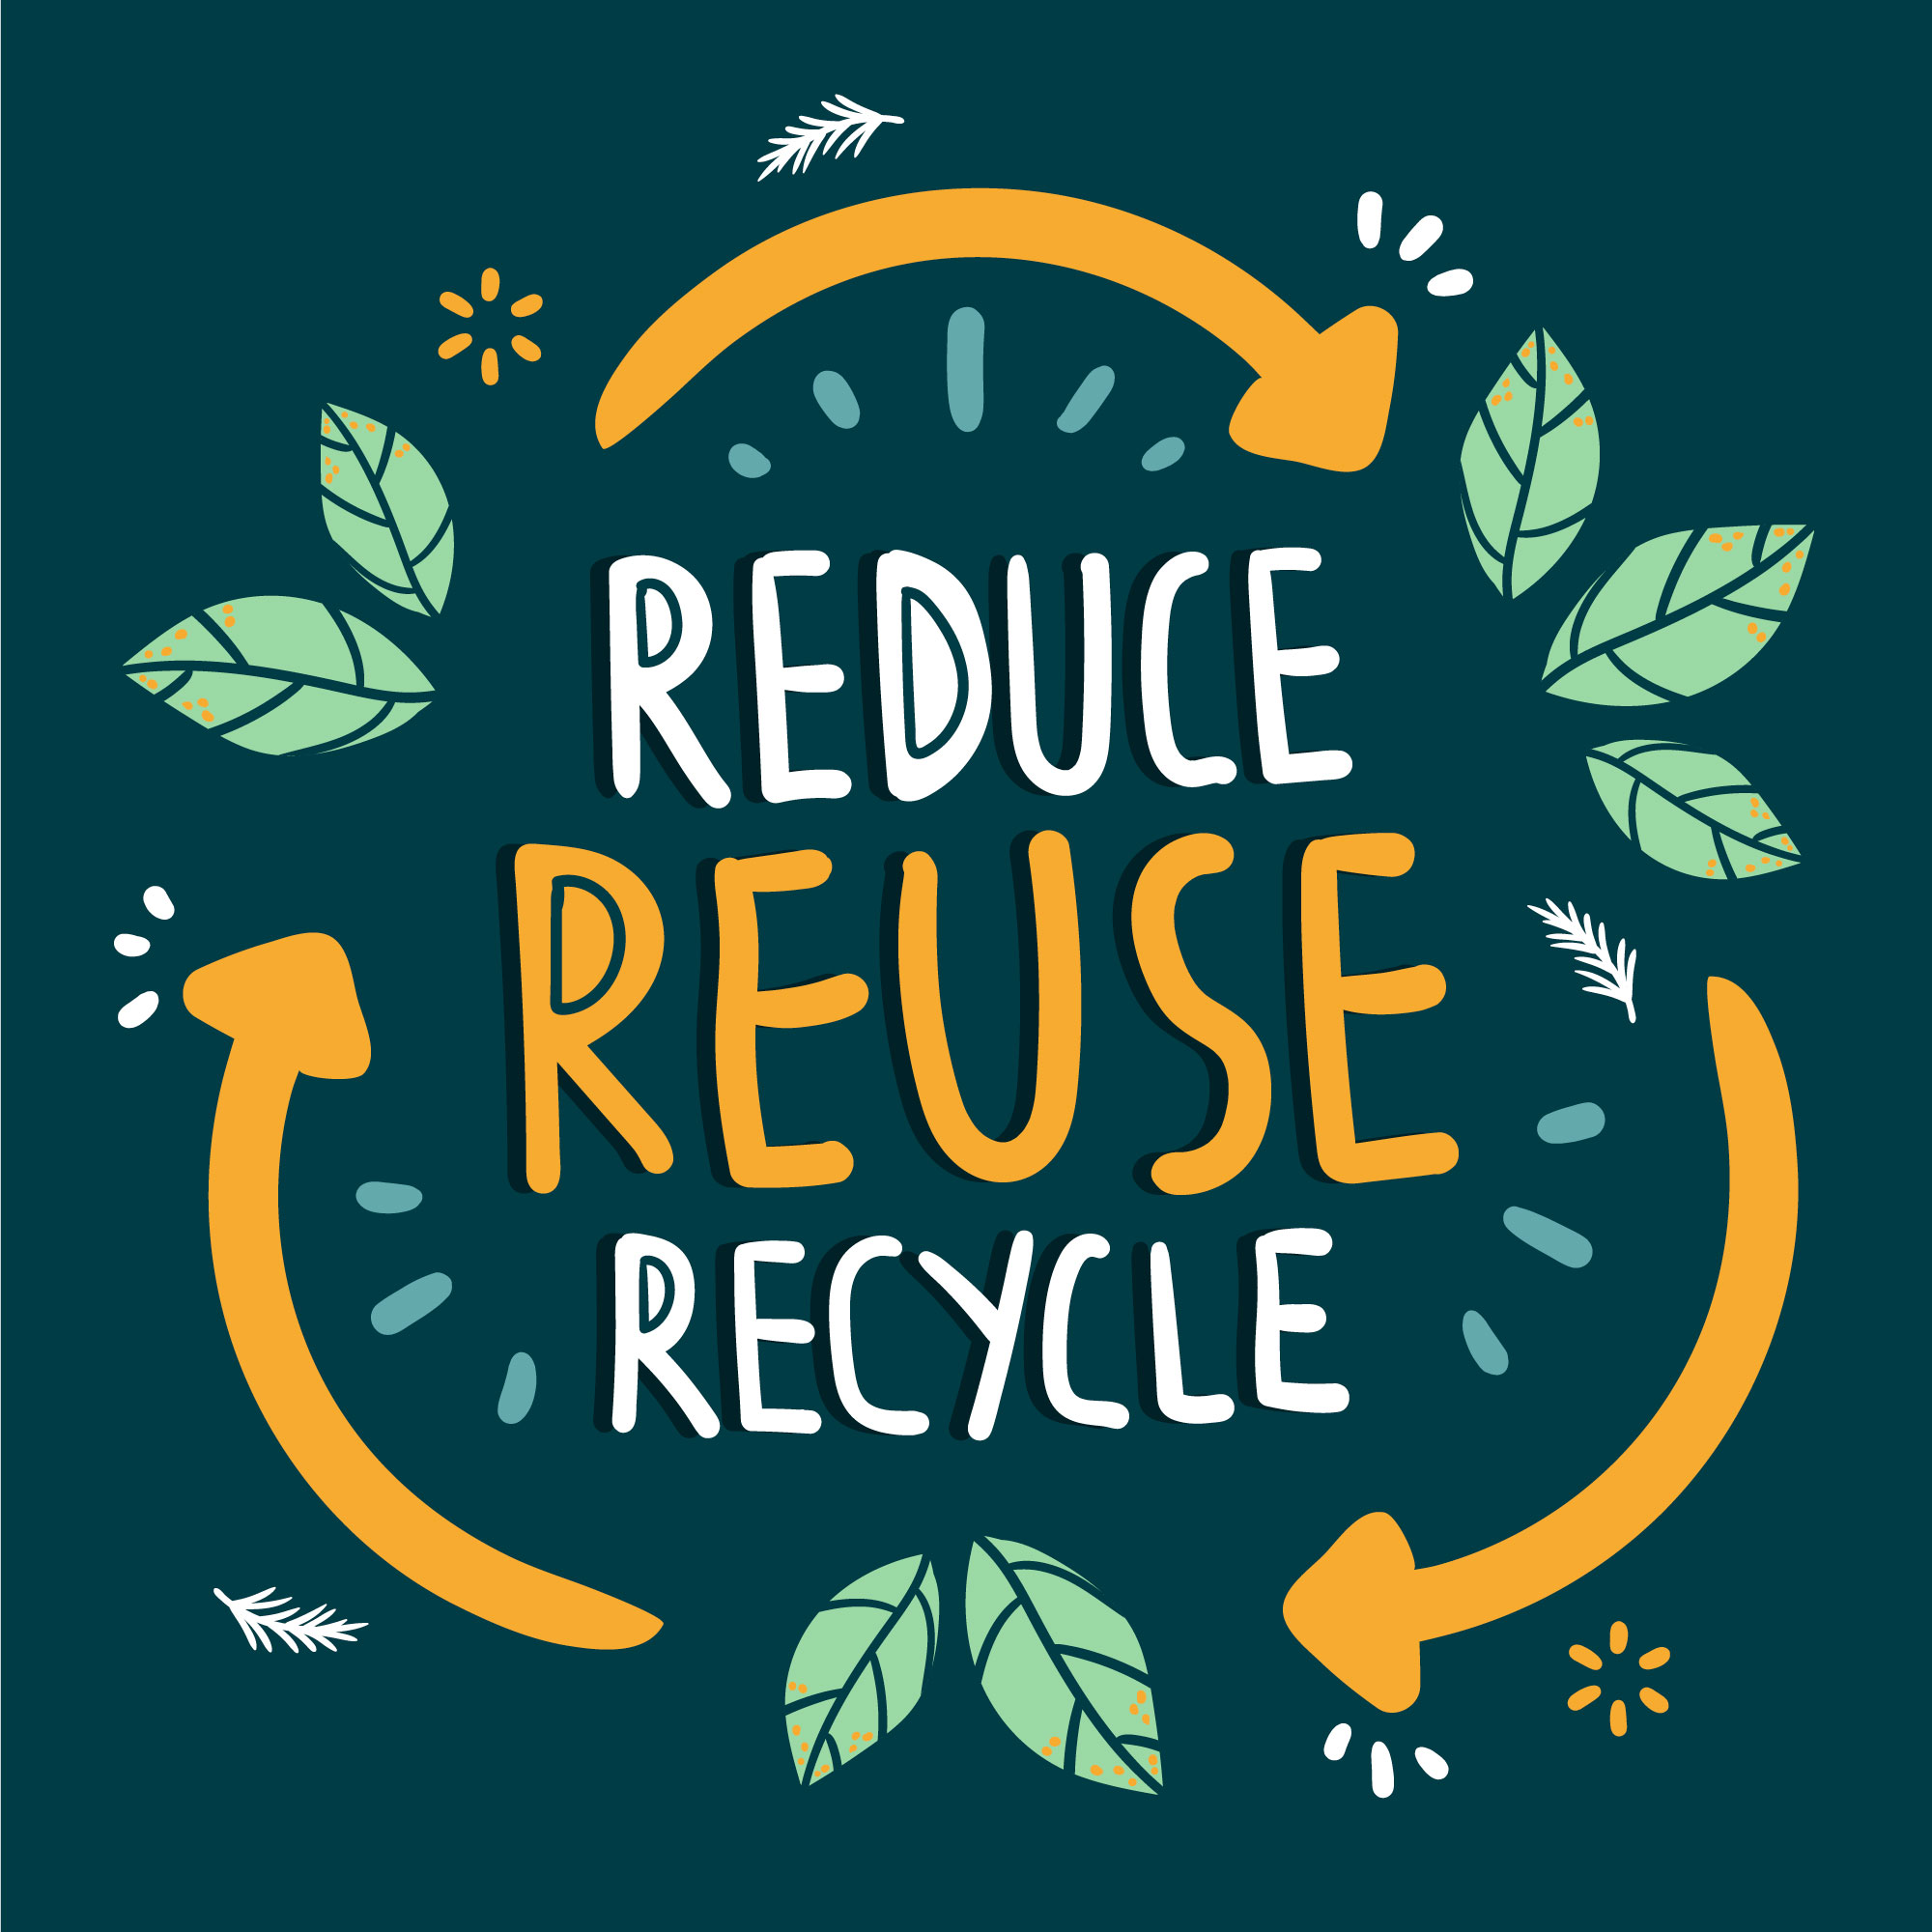 Simple Ways to Reduce Waste at Home